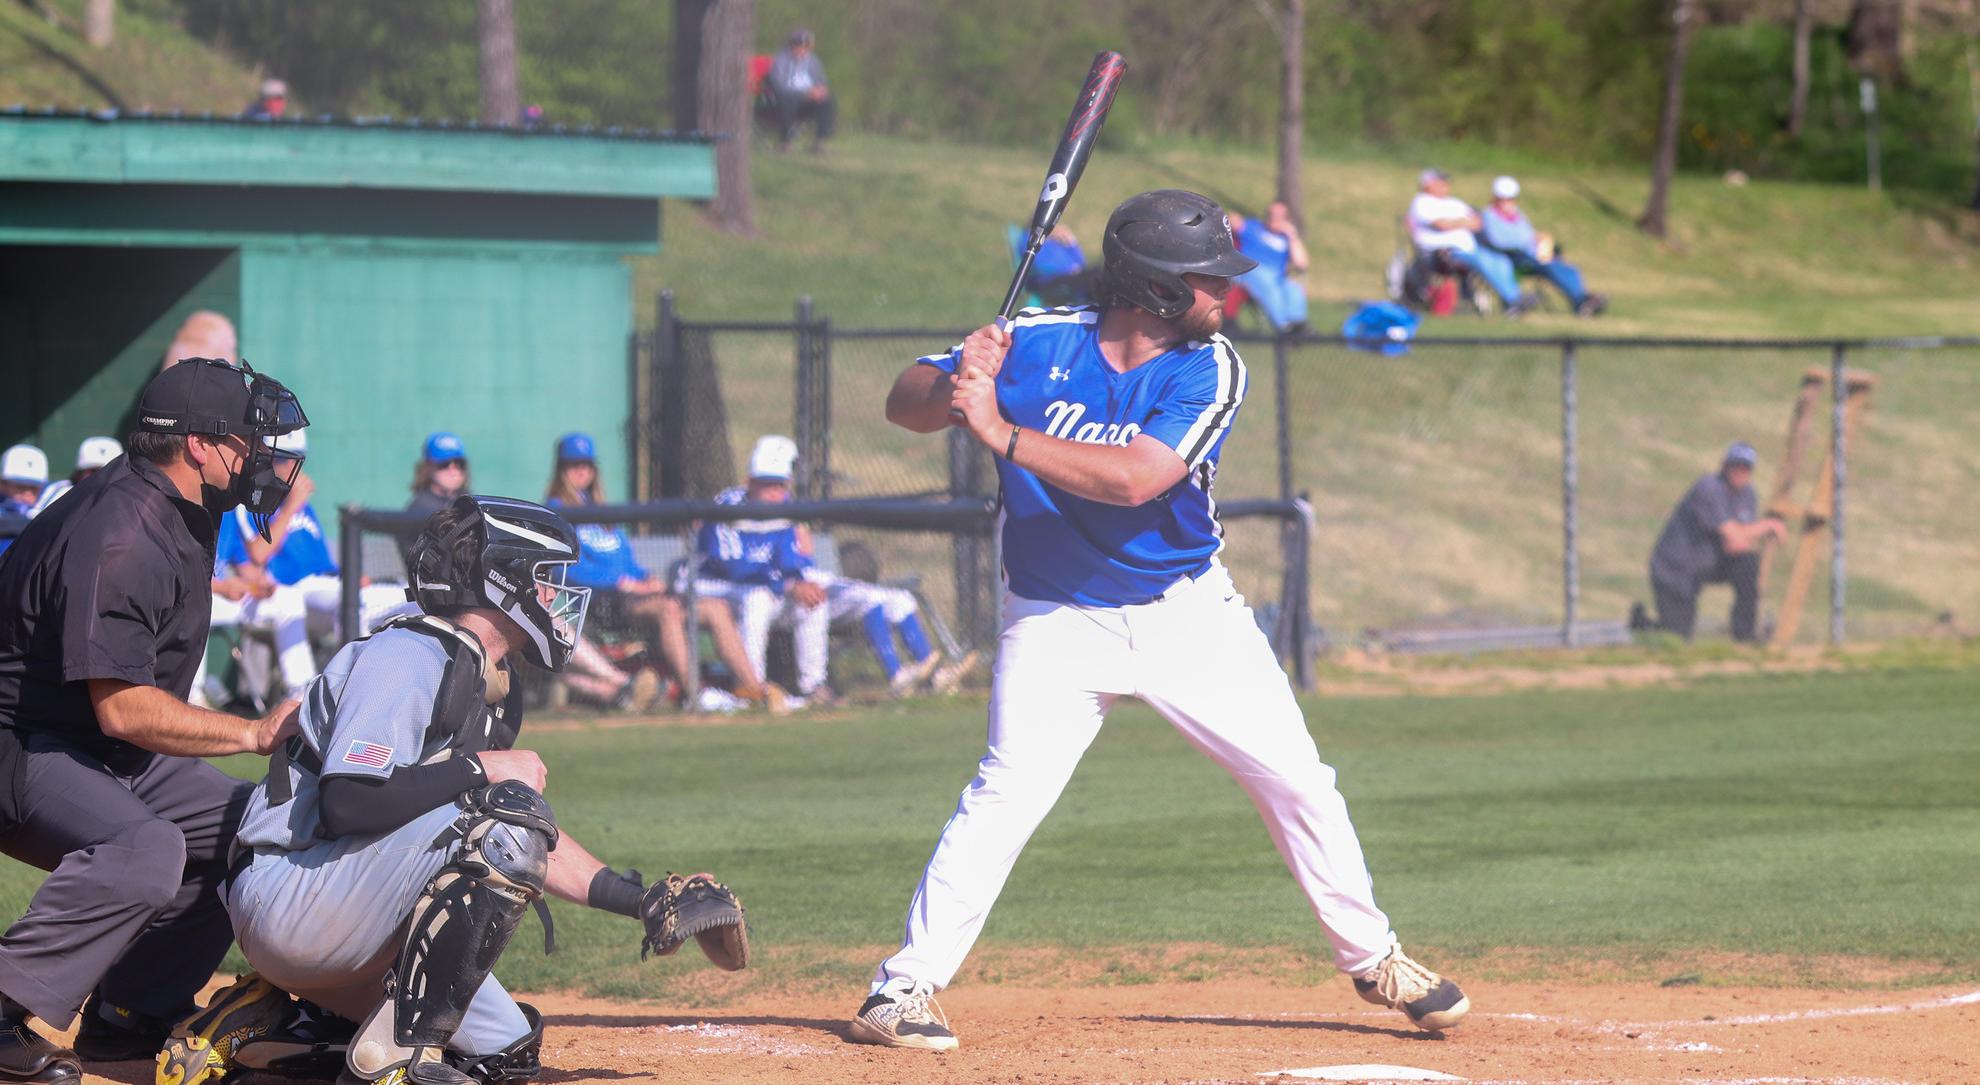 Senior infielder Holden Lanier's go-ahead RBI-double helped BC to a conference-opening victory over Maryville (Photo courtesy of Victoria Brayman '22).